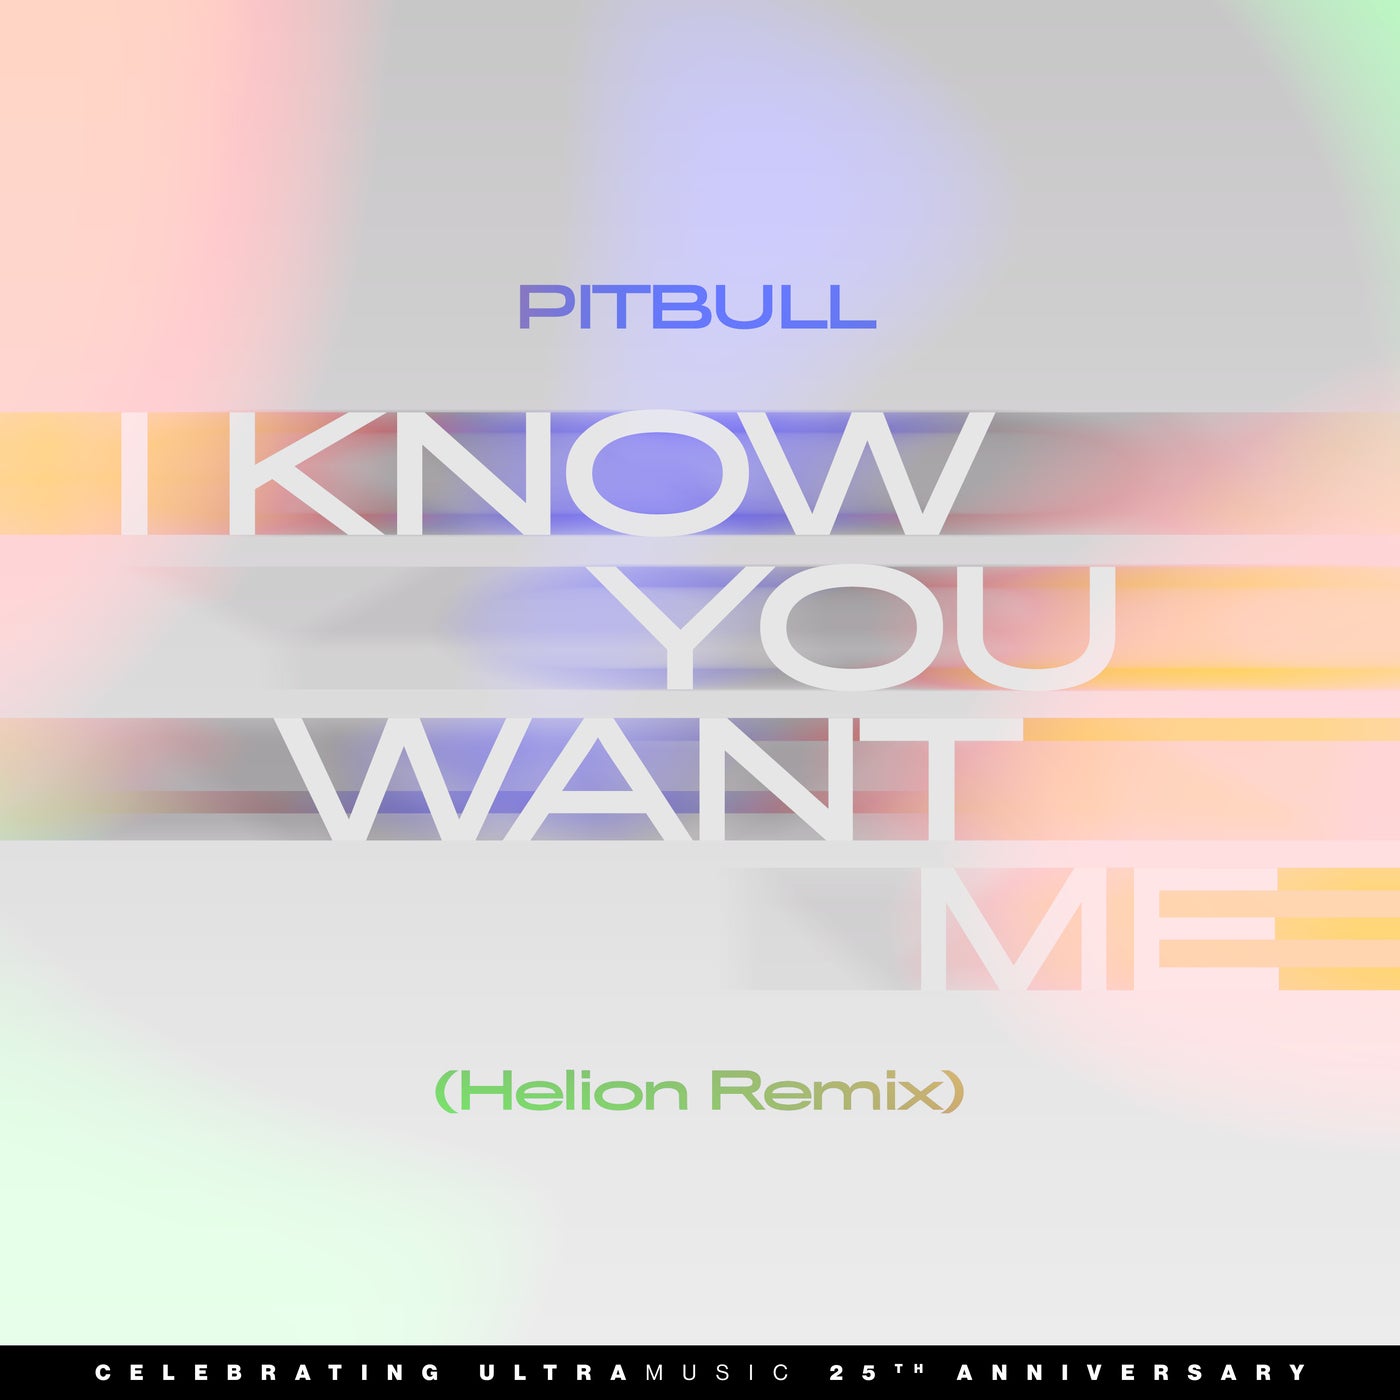 Скачать Pitbull - I Know You Want Me (Calle Ocho) (Helion Extended.